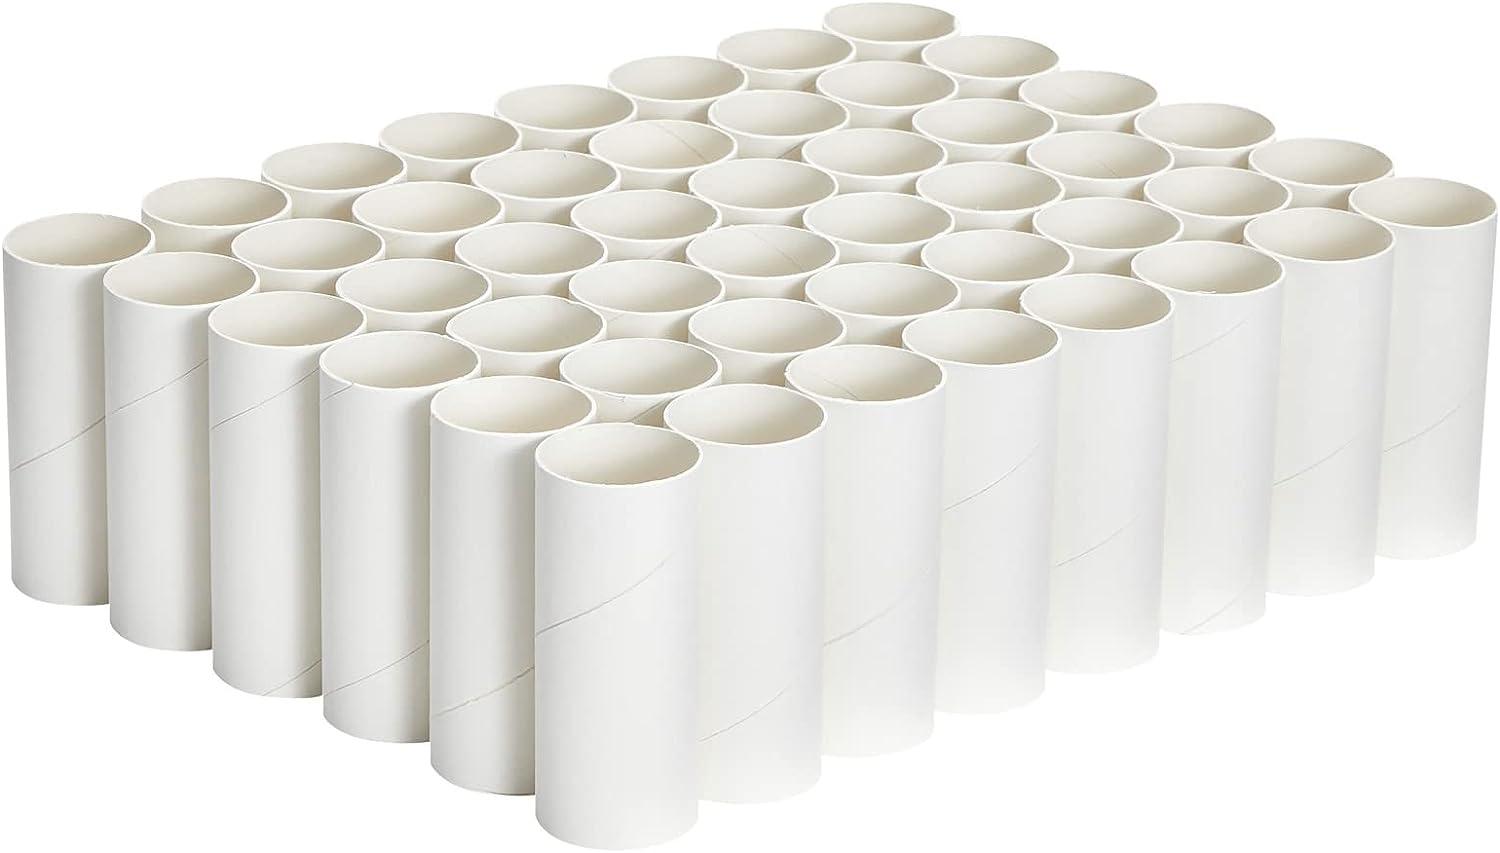 48 Pack Empty Toilet Paper Rolls for Crafts, Brown Cardboard Tubes for DIY,  Classrooms, Dioramas (1.6 x 3.95 in)